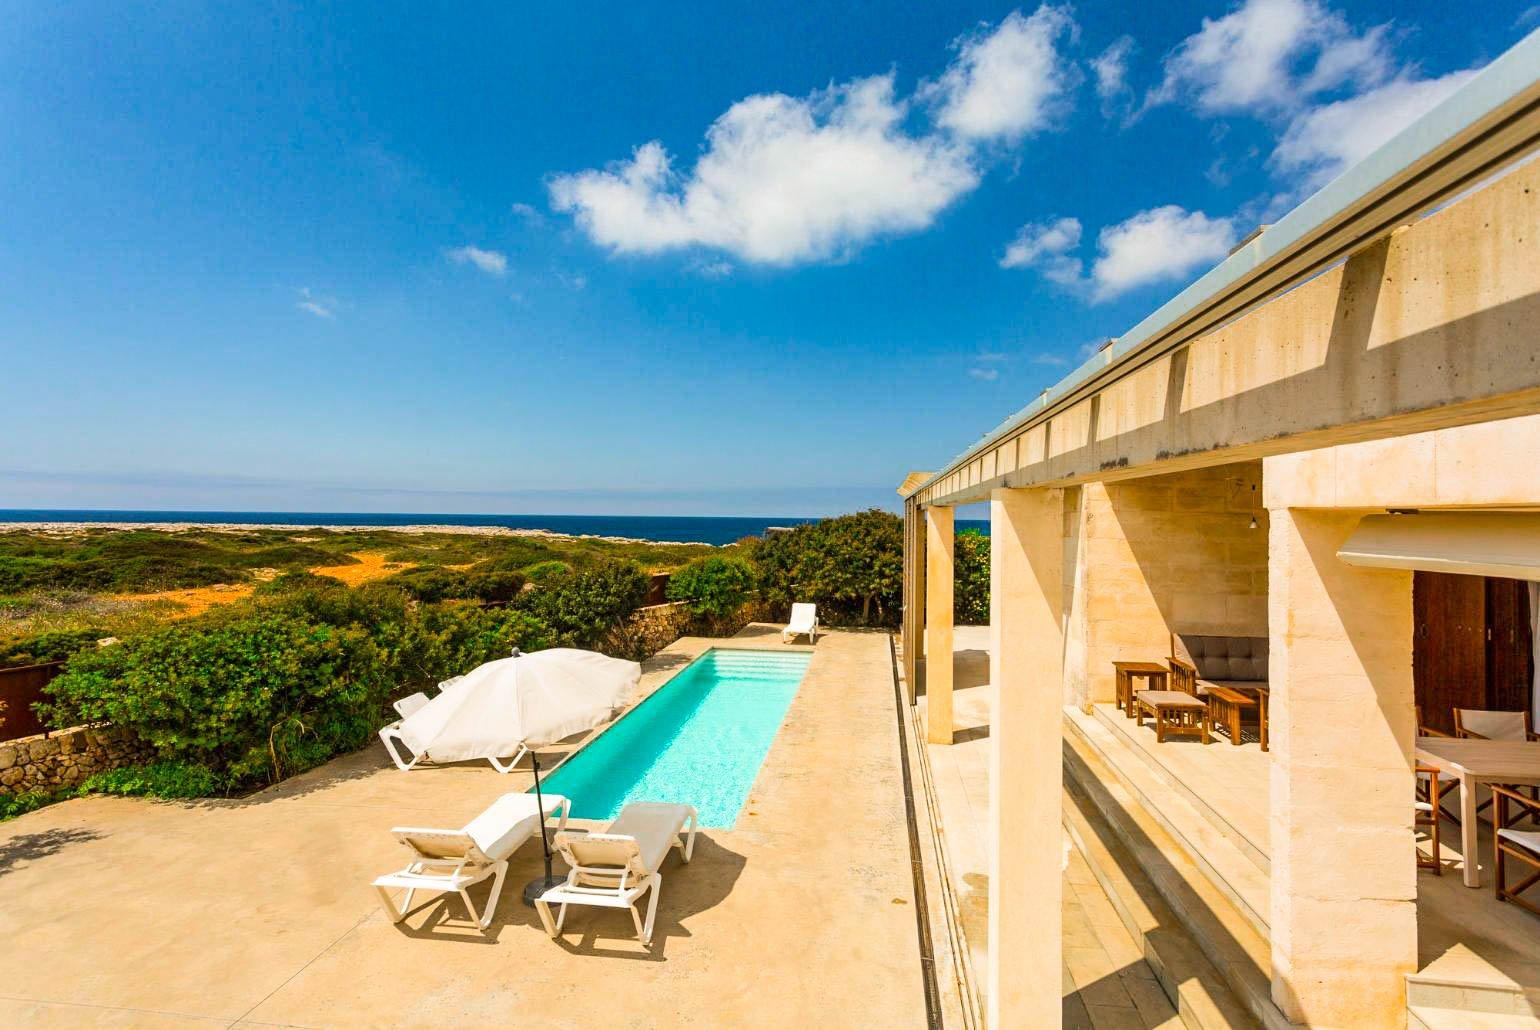 Beautiful villa with private pool, partially sheltered terrace, and sea views